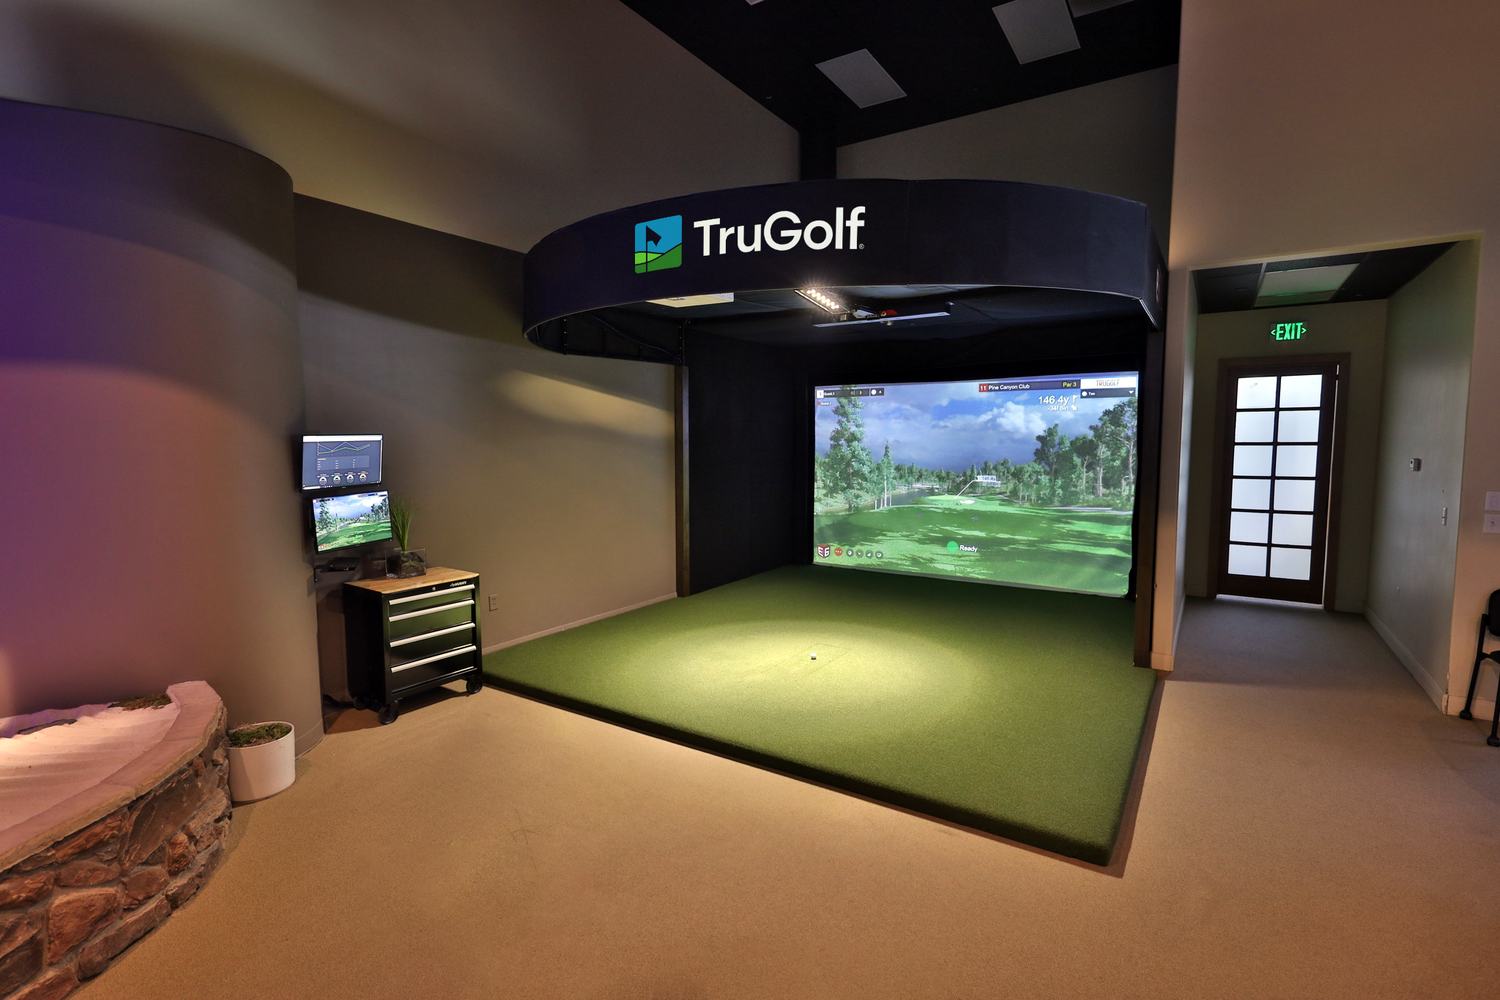 Front view of the TruGolf professional golf simulator